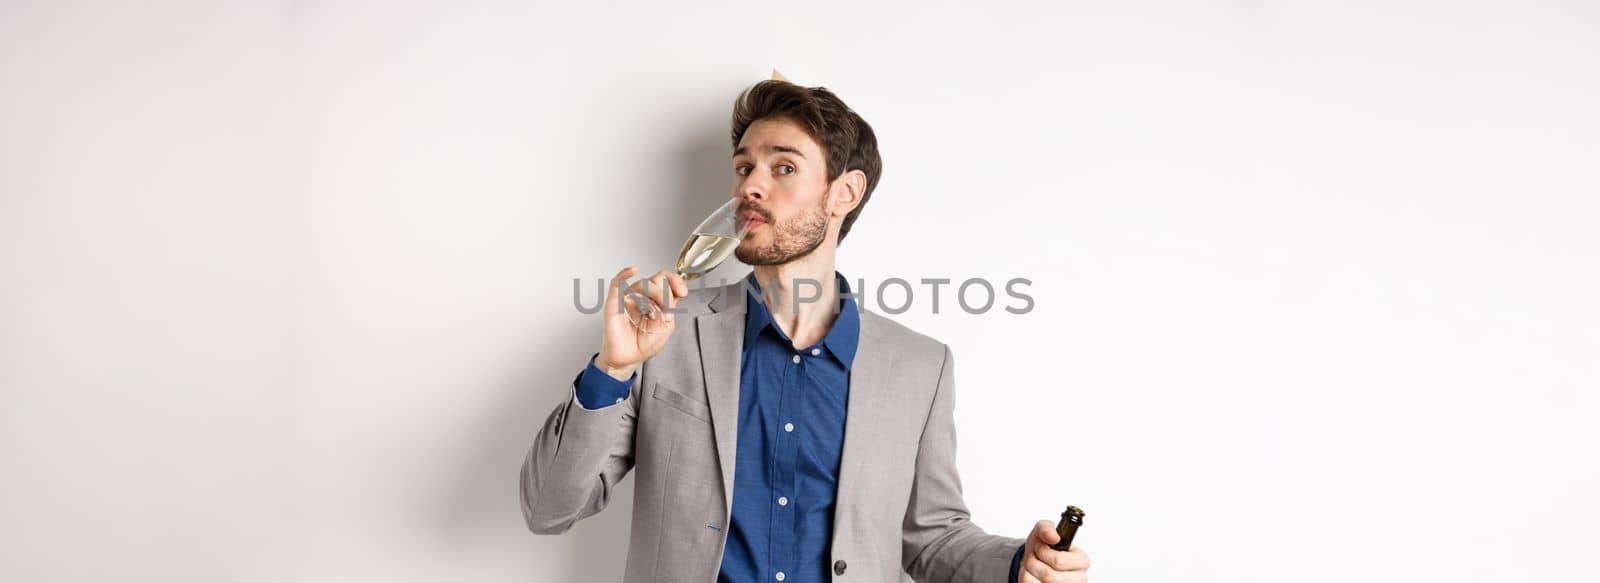 Celebration and holidays concept. Handsome bearded man in suit and birthday hat holding bottle, drinking glass of champagne, standing on white background.